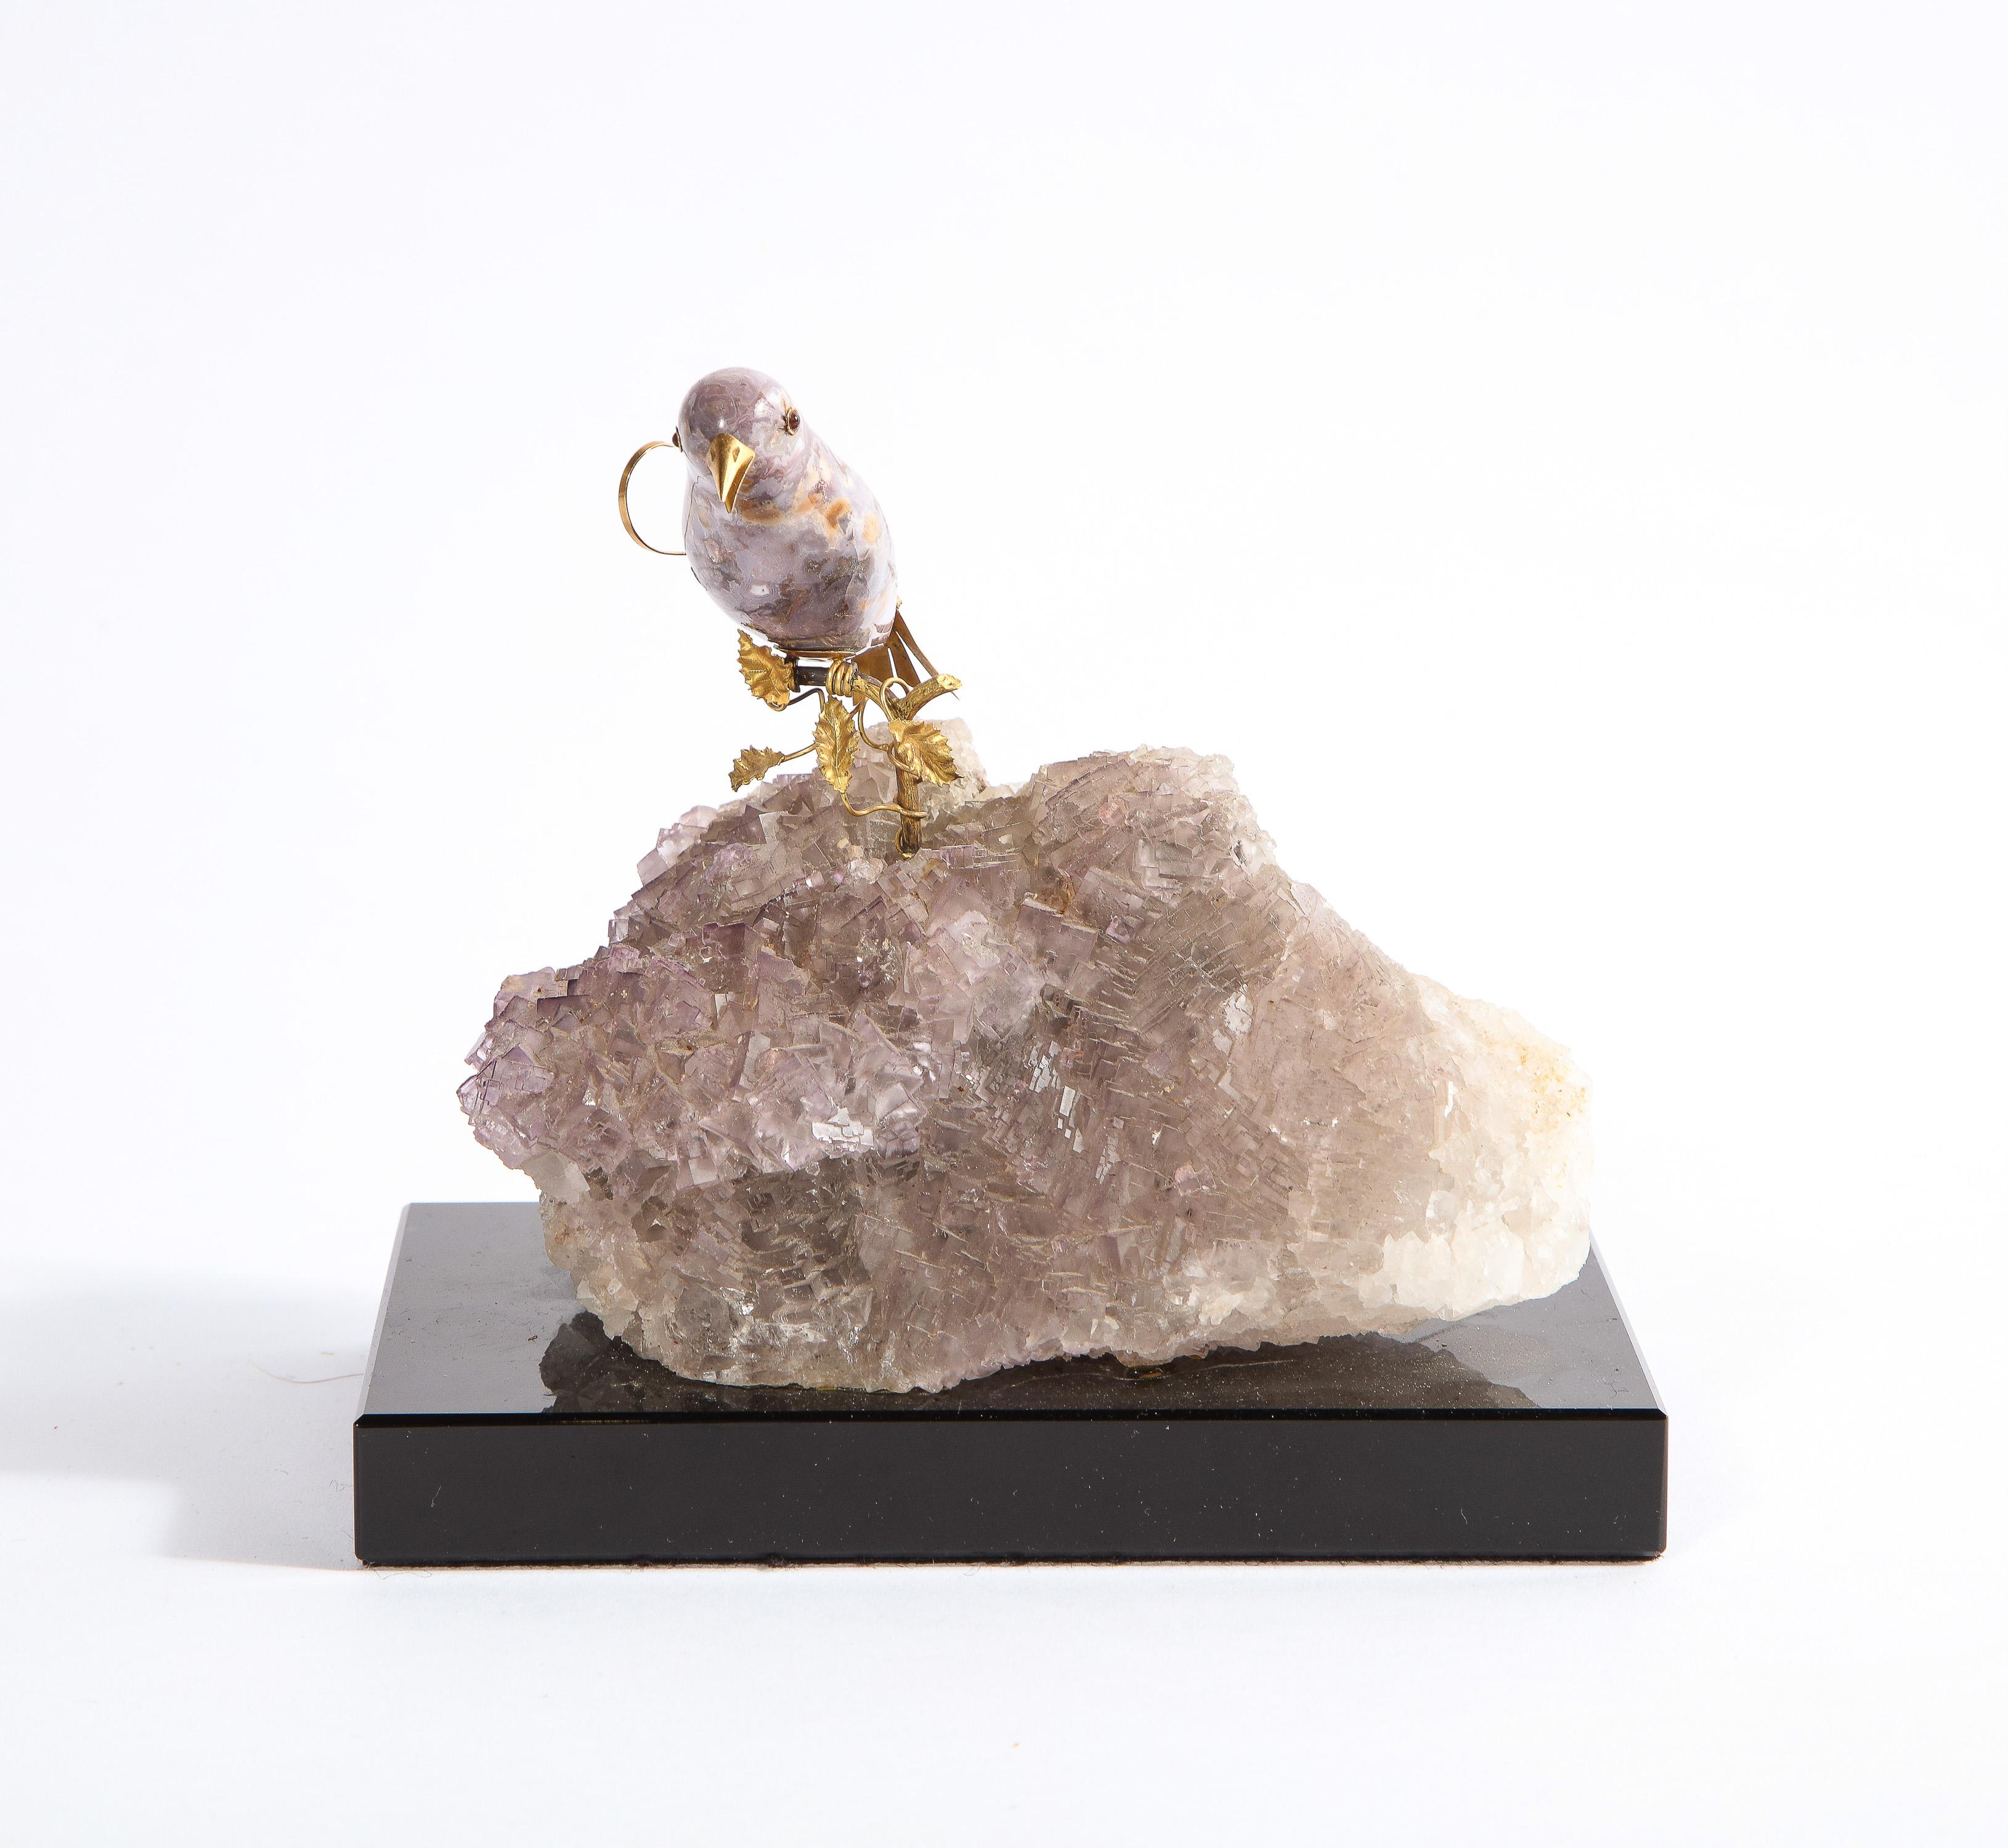 A 14K Gold Mounted Agate Bird on Fluorite Stone, Mounted on Black Glass, 20th century.

A really nice and cool object - a true collectors piece. Part of a group of five birds, please see our other listings for the rest of this collection.

Measures: